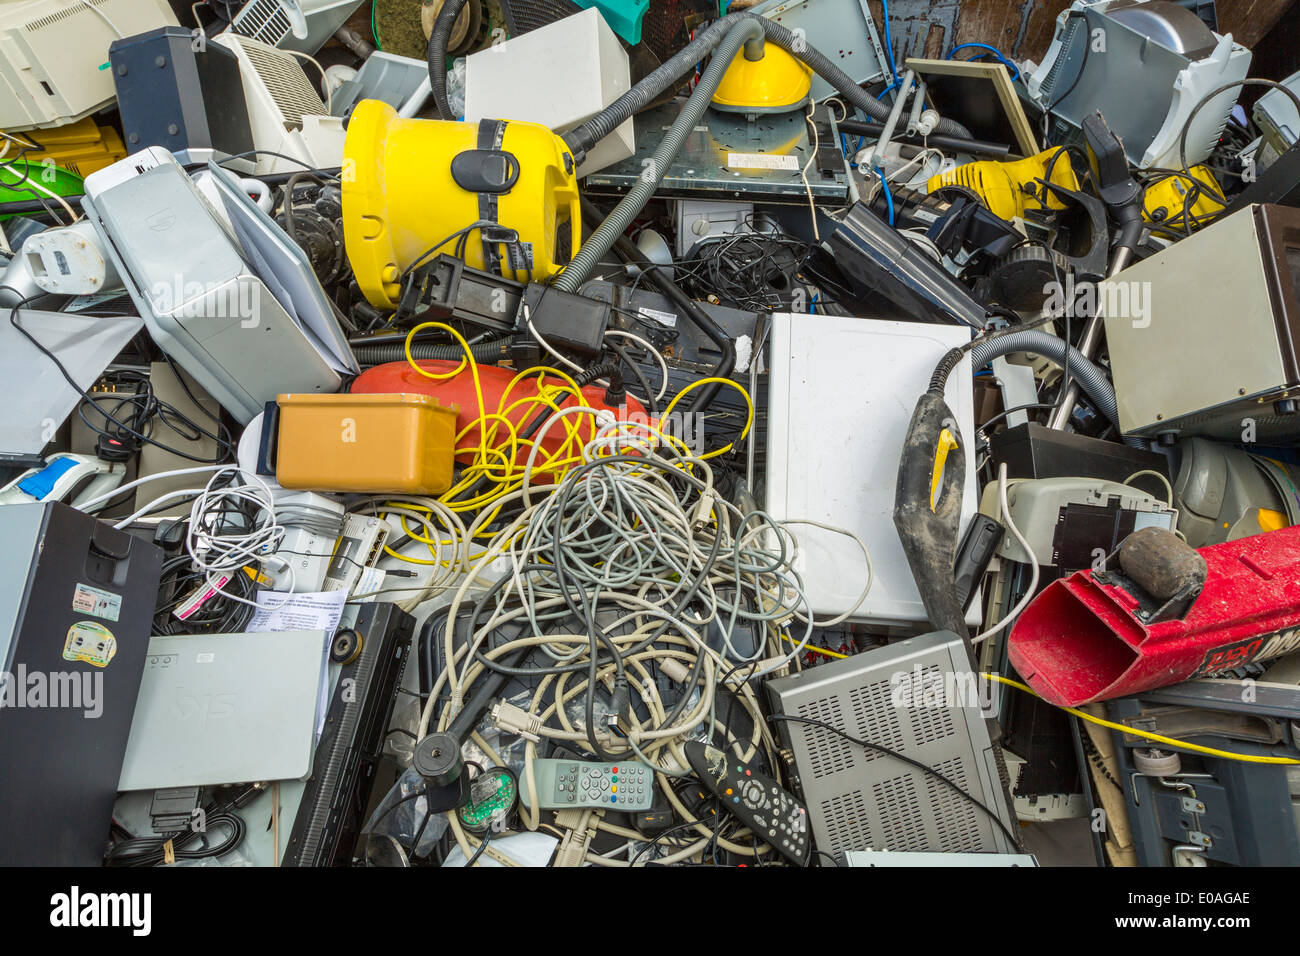 Small electrical appliances laying in a container, for recycling into new items and materials to reduce waste and salvage valuable parts, London, UK Stock Photo